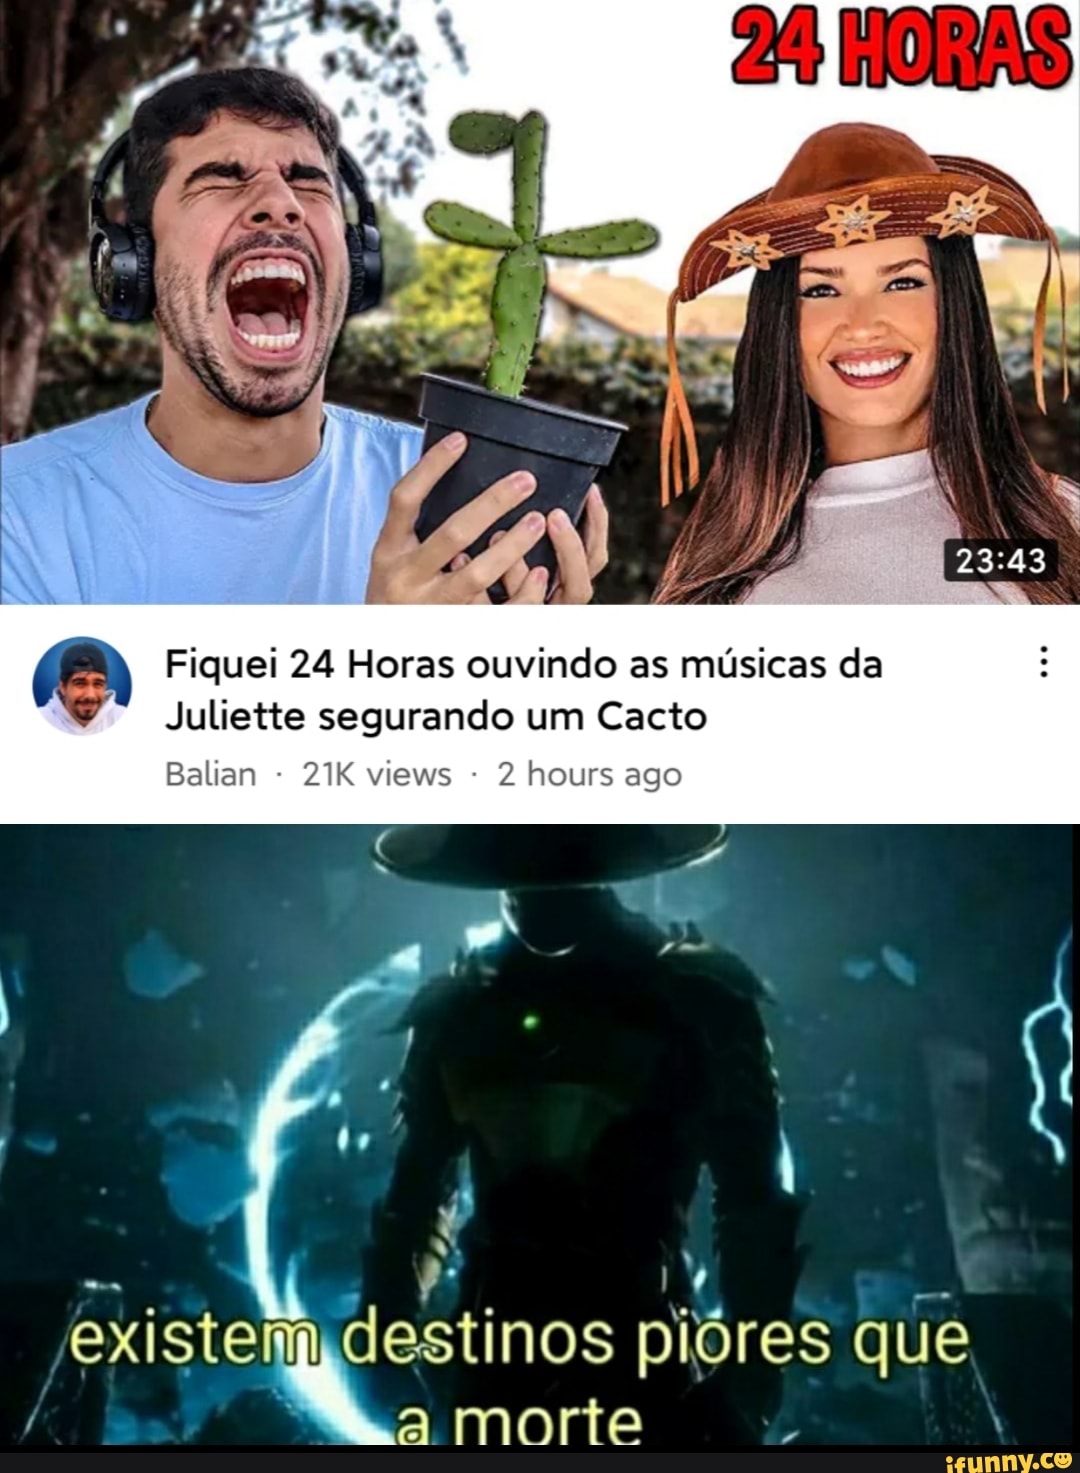 Pedrokys memes. Best Collection of funny Pedrokys pictures on iFunny Brazil